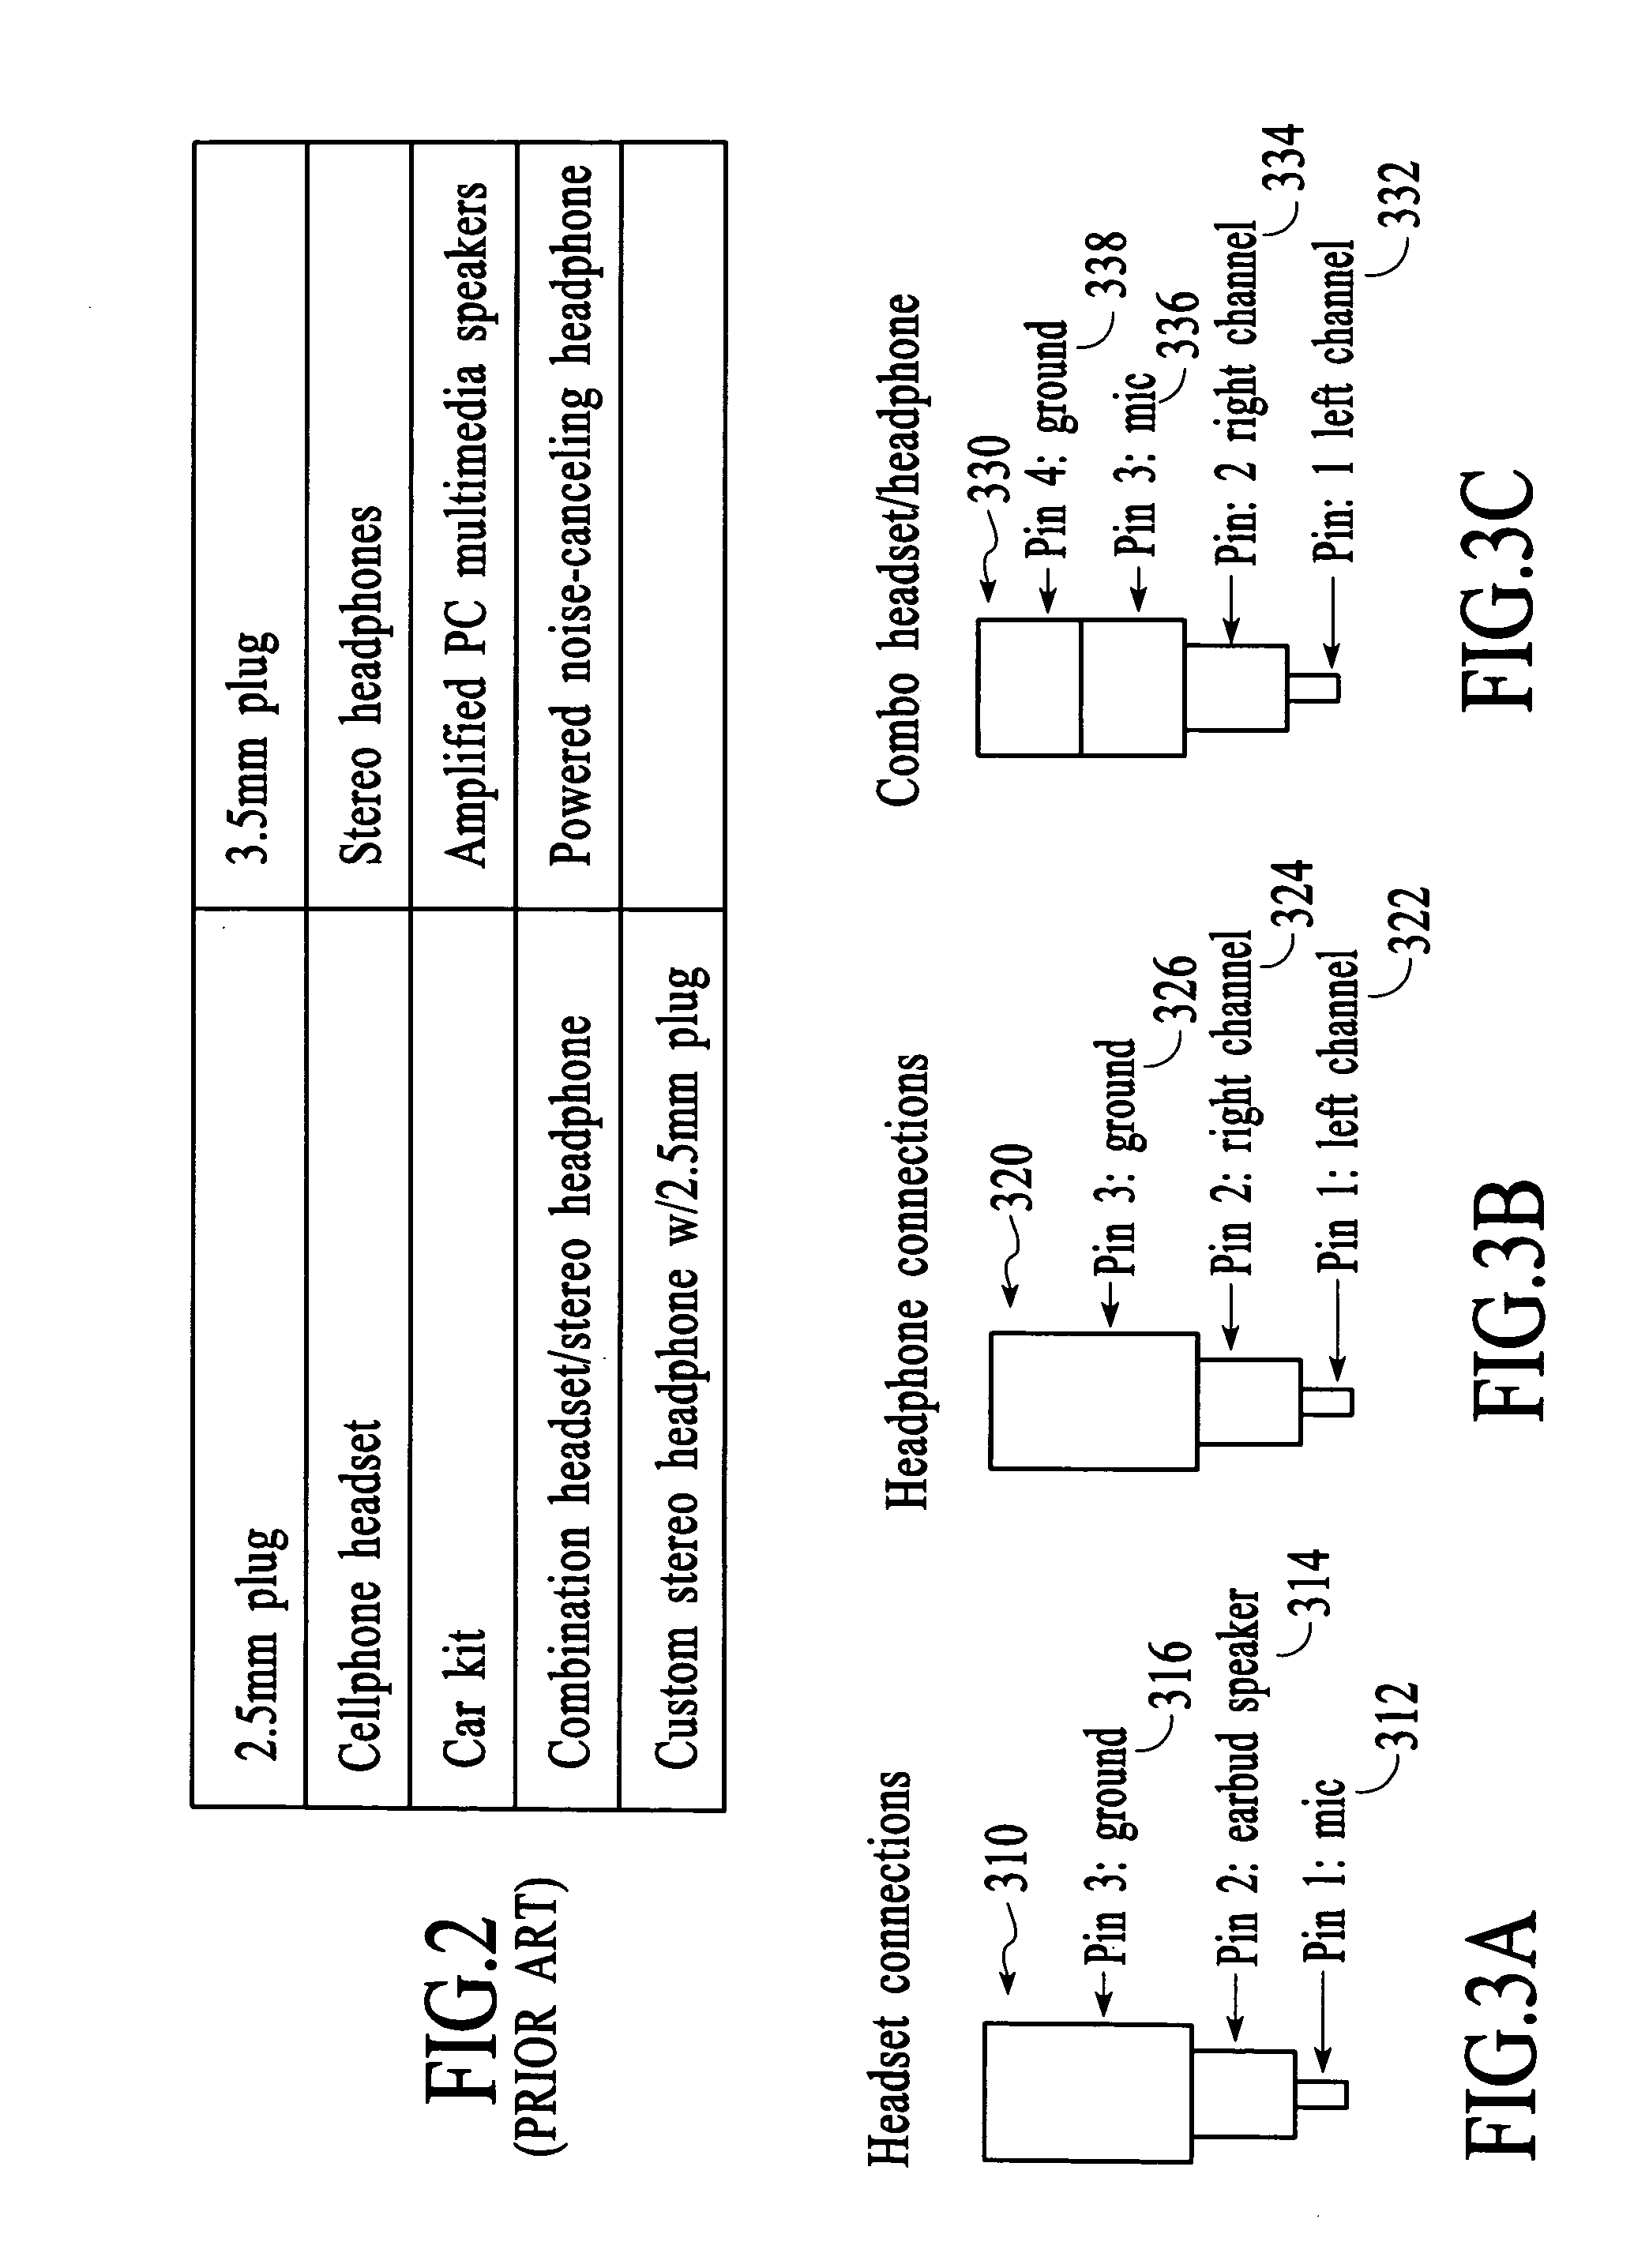 Connector system for supporting multiple types of plug carrying accessory devices